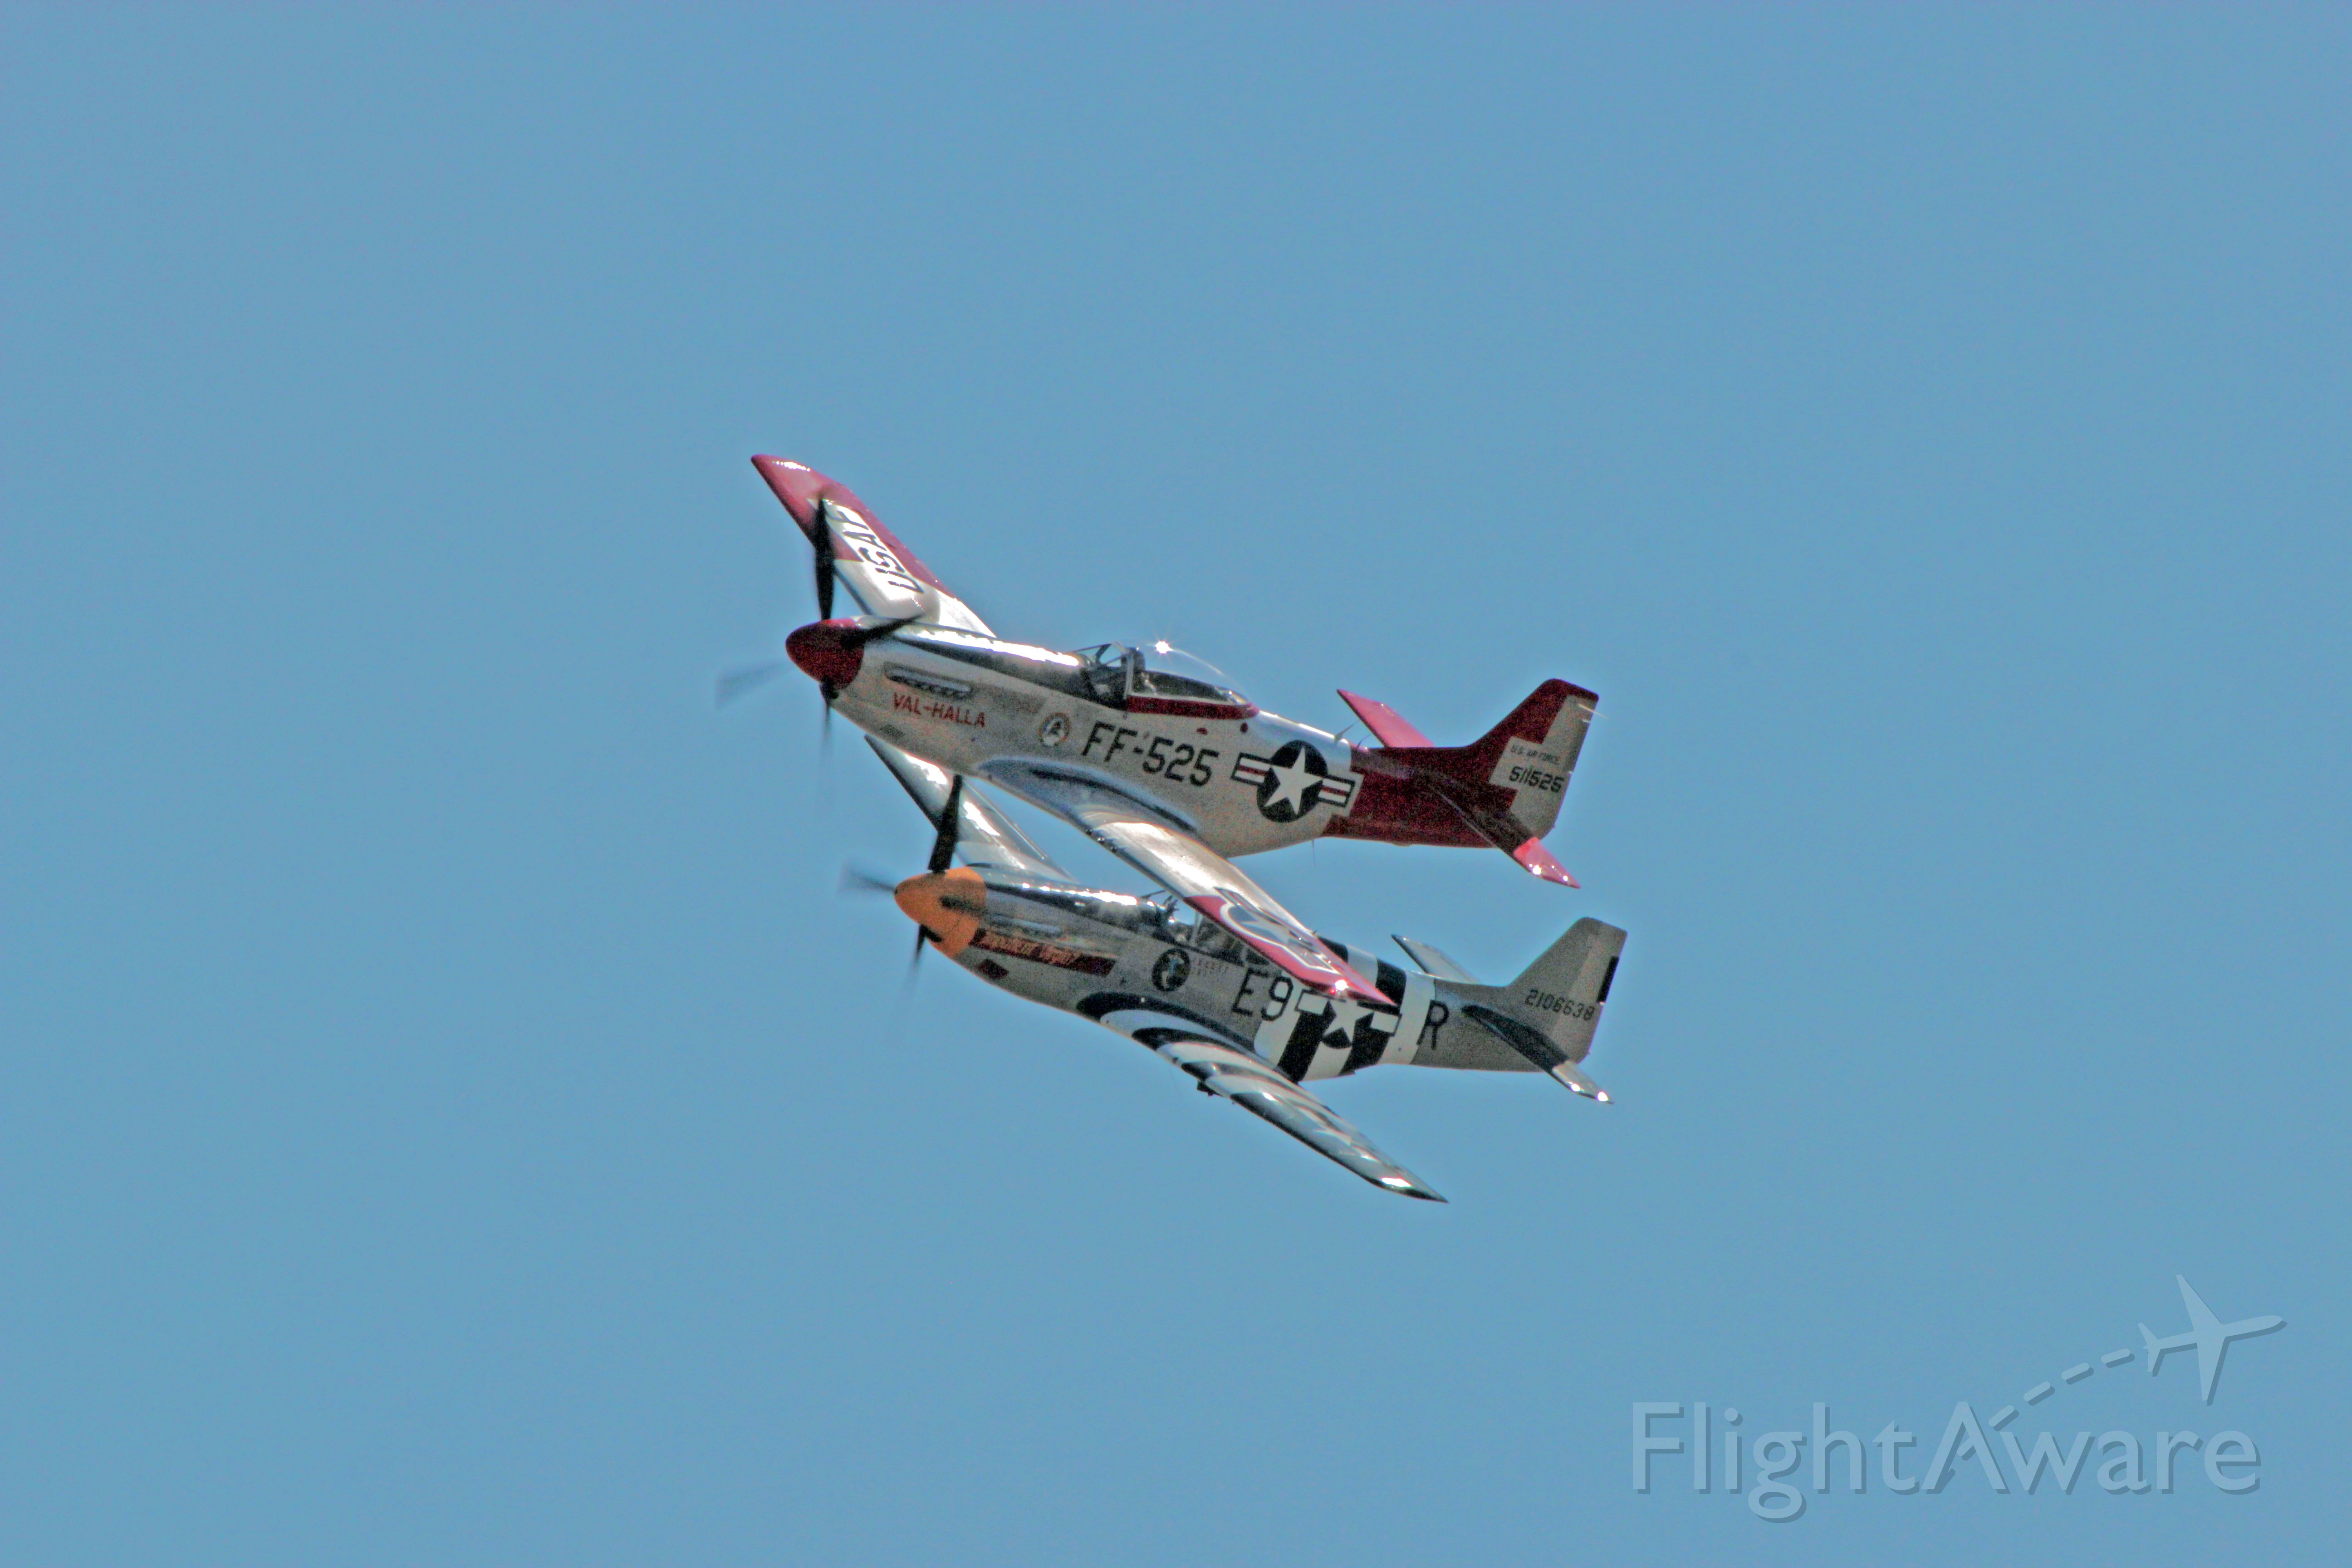 North American P-51 Mustang (N151AF) - Making a second pass at Vintage aircraft weekend at Paine Field.